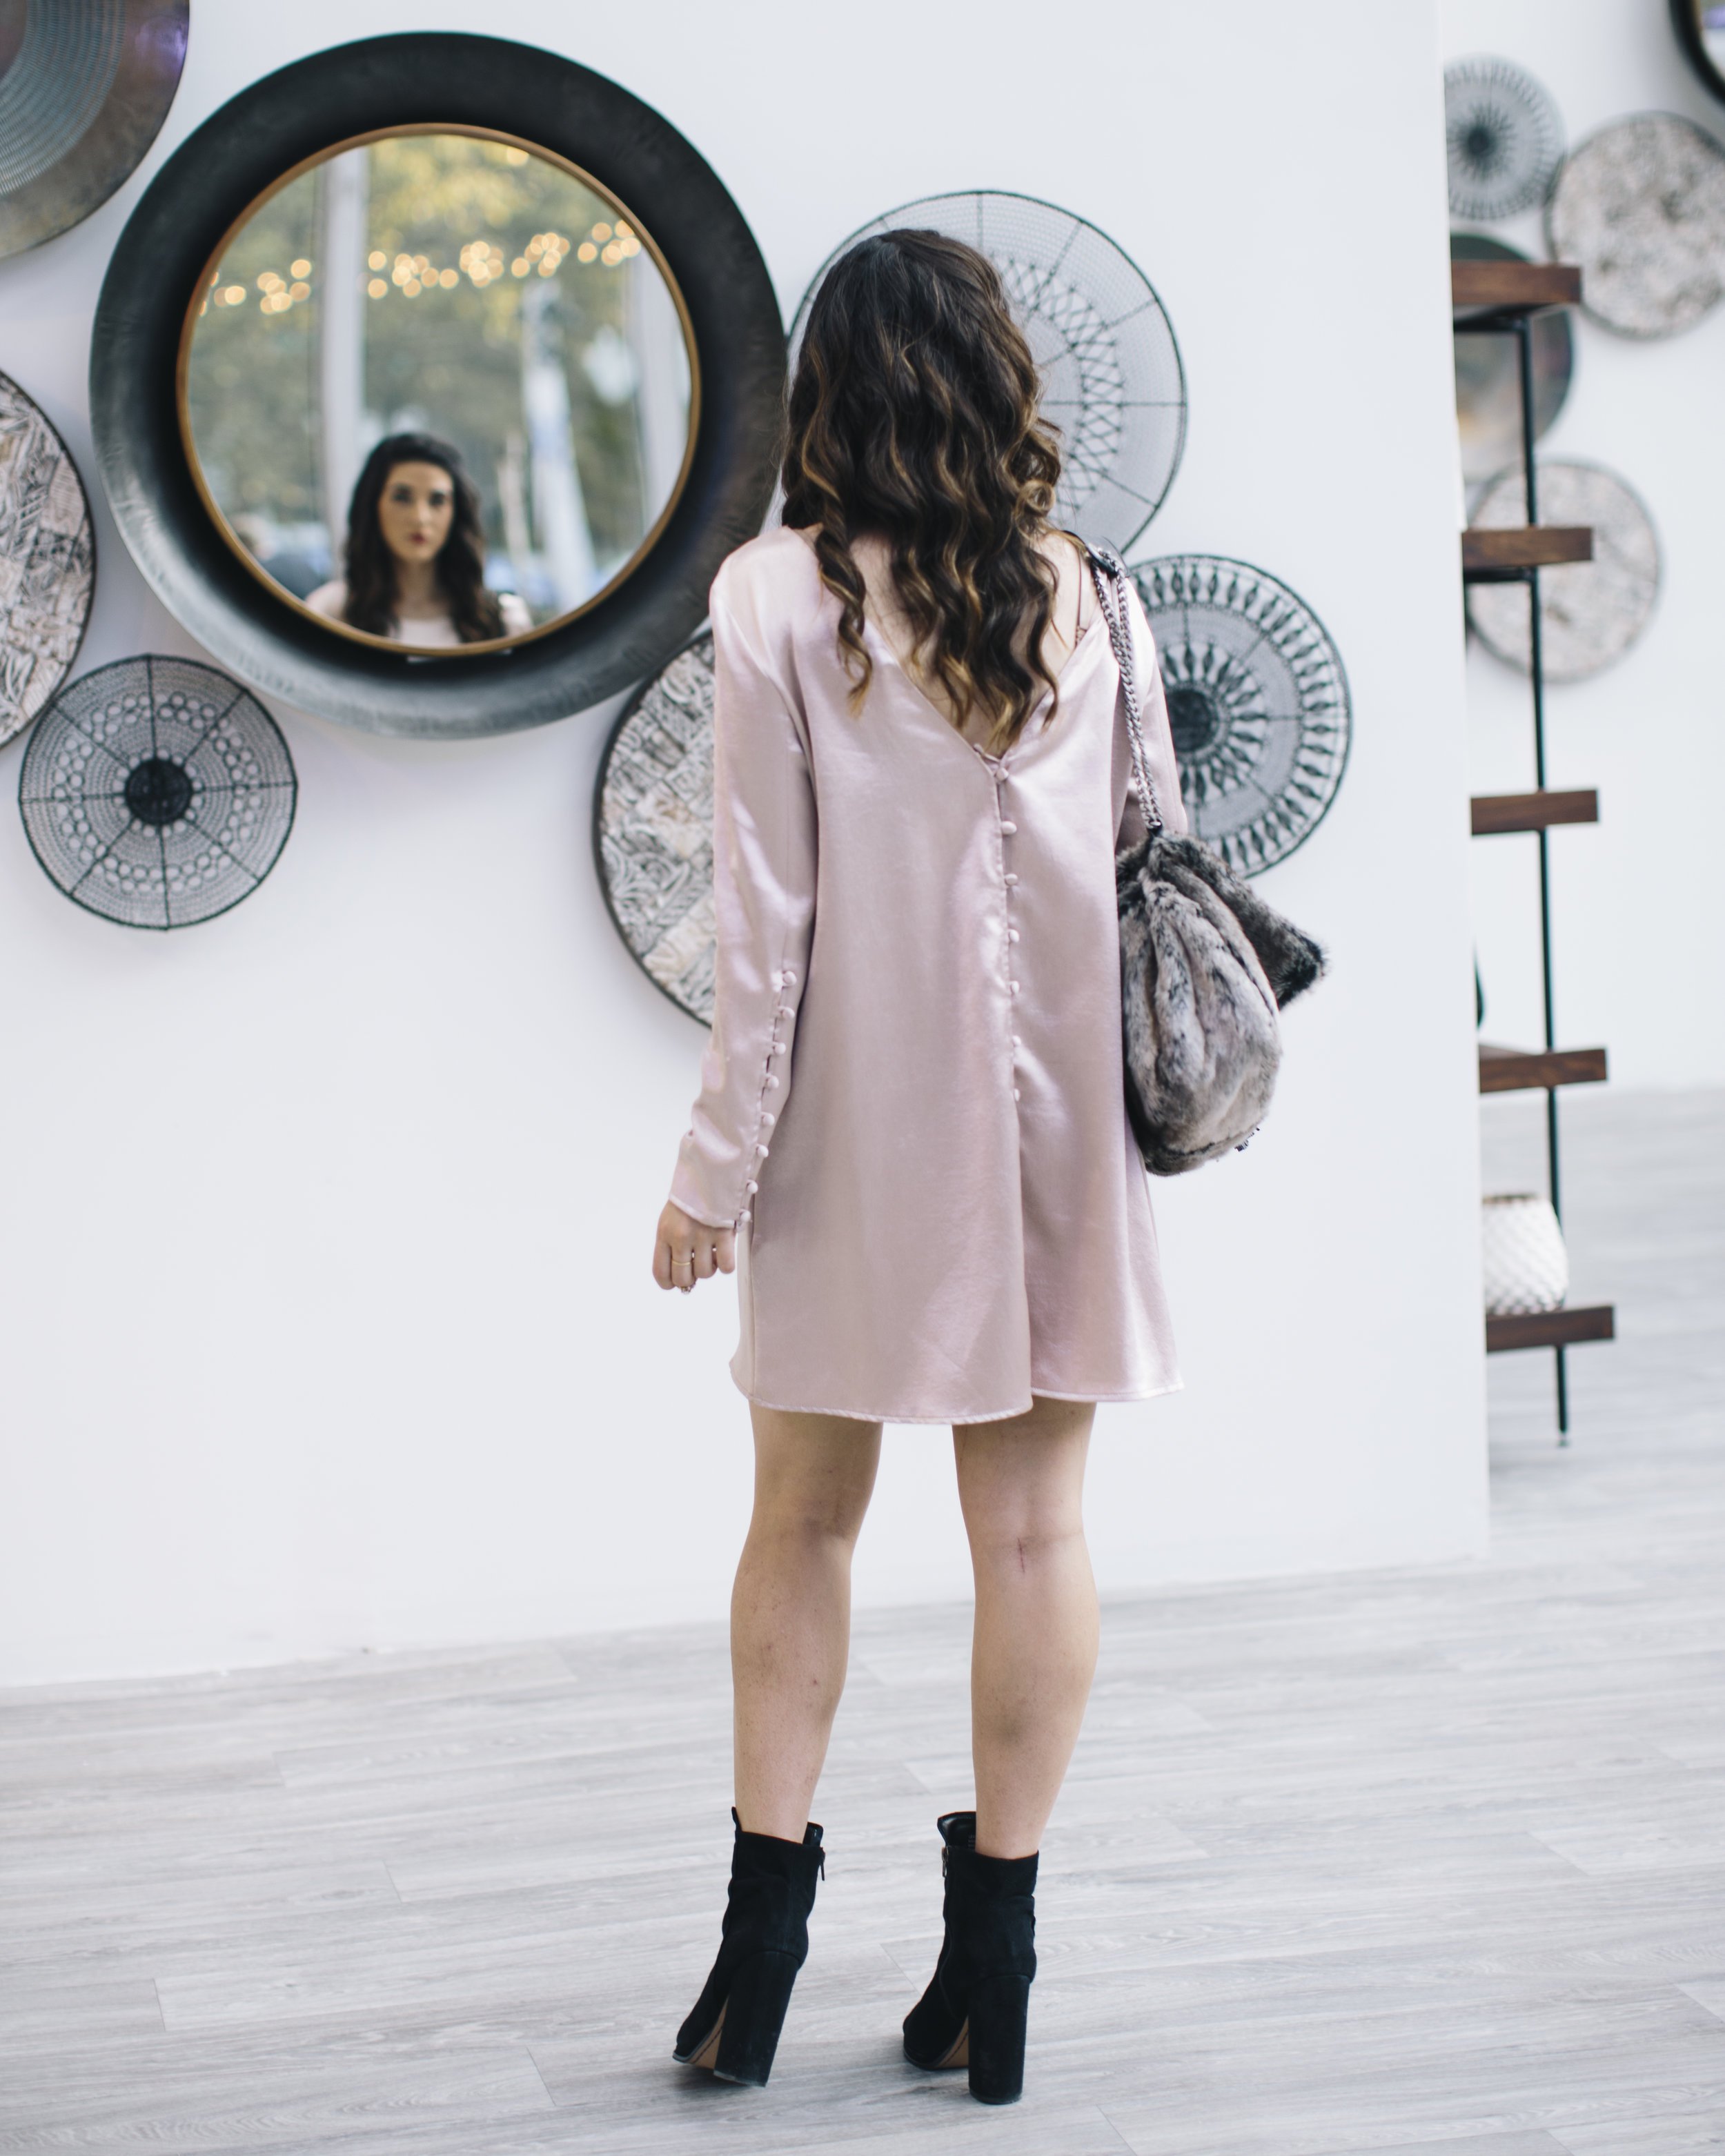 Blush Dress Faux-Fur Bag Q&A On Blogger Collaborations Louboutins & Love Fashion Blog Esther Santer NYC Street Style Blogger Outfit OOTD Trendy Shoes Black Booties Online Shopping Purse Pretty Braid Hair Girl Women Pink Holiday Inspo Clothes Lifestyle.jpg